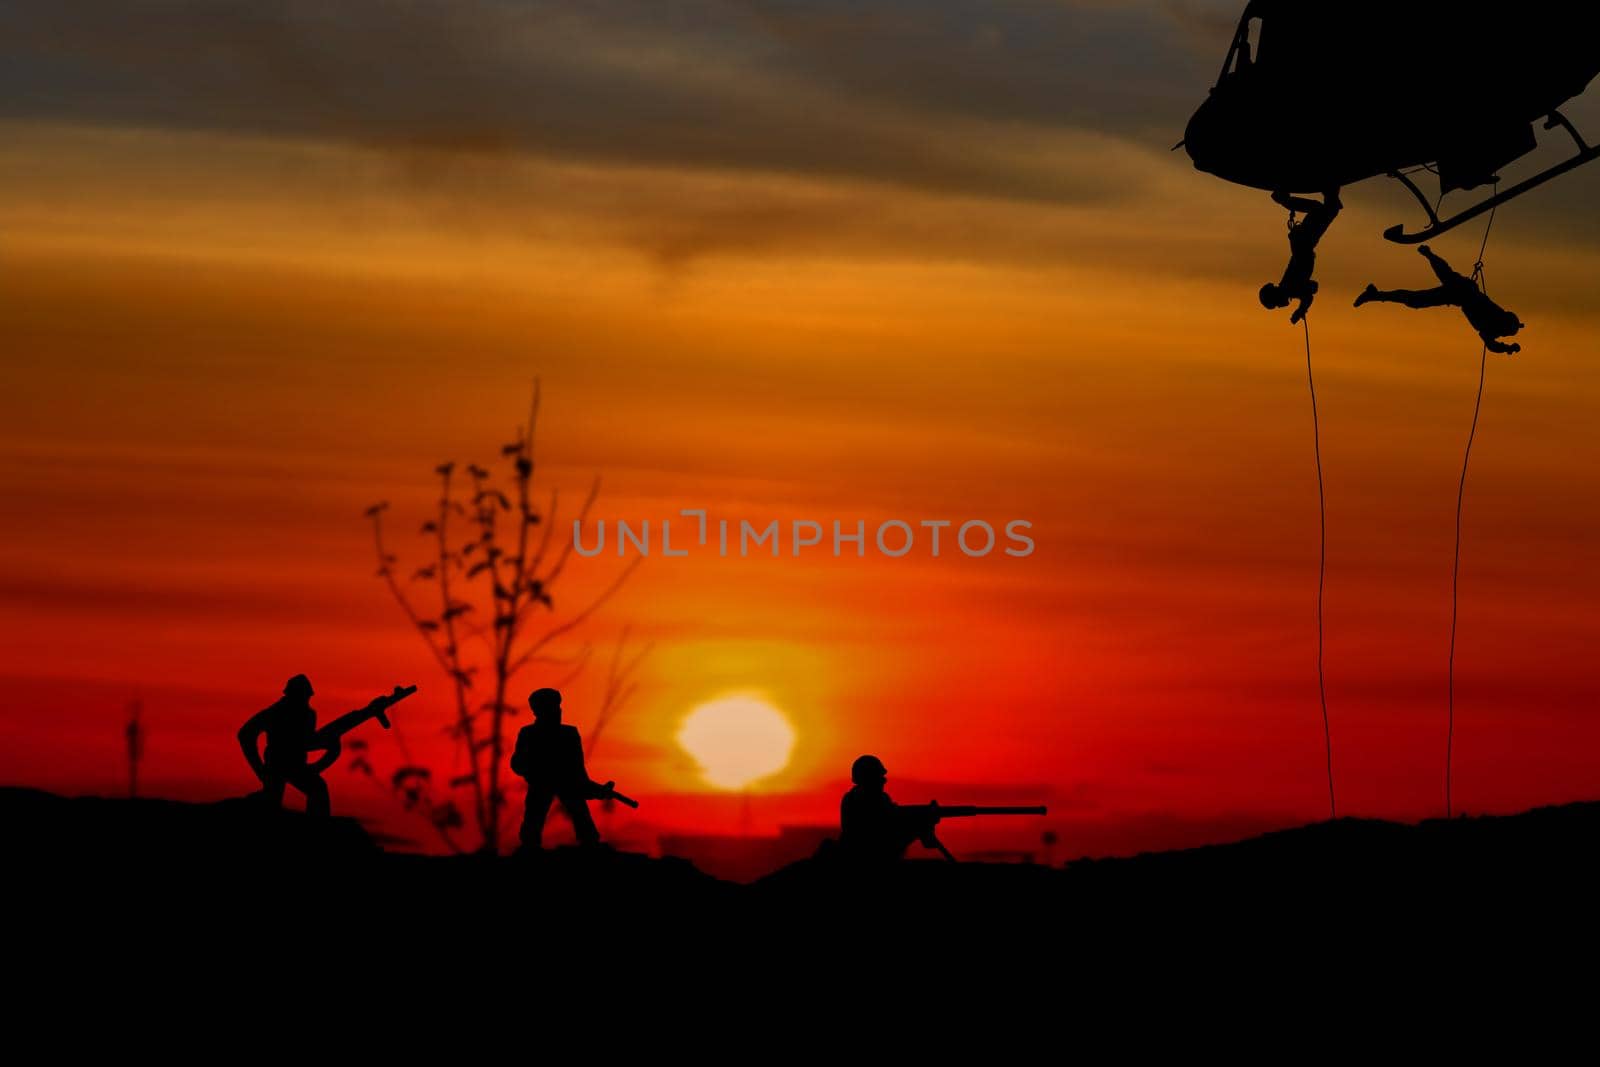 Silhouette Soldiers rappel down to attack from helicopter with warrior beware danger On the ground sunset Background blur and copy space add text ( Concept stop hostilities To peace) by pramot